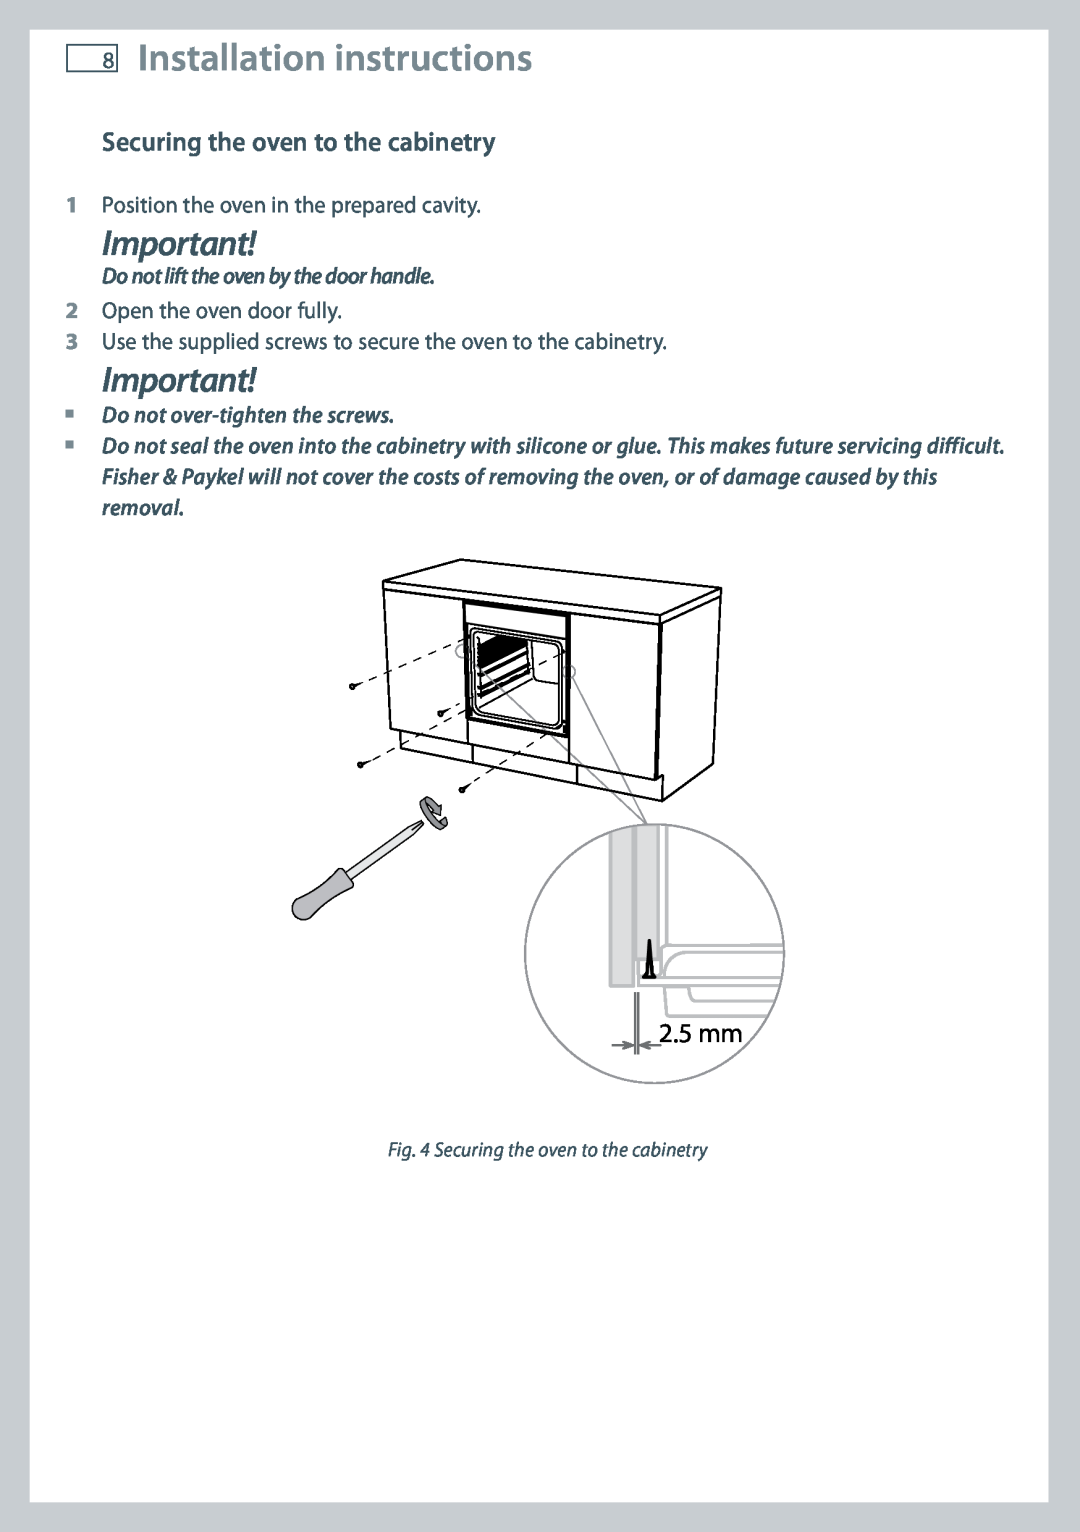 Fisher & Paykel OB60S9DEP installation instructions 8Installation instructions, Securing the oven to the cabinetry, 2.5 mm 